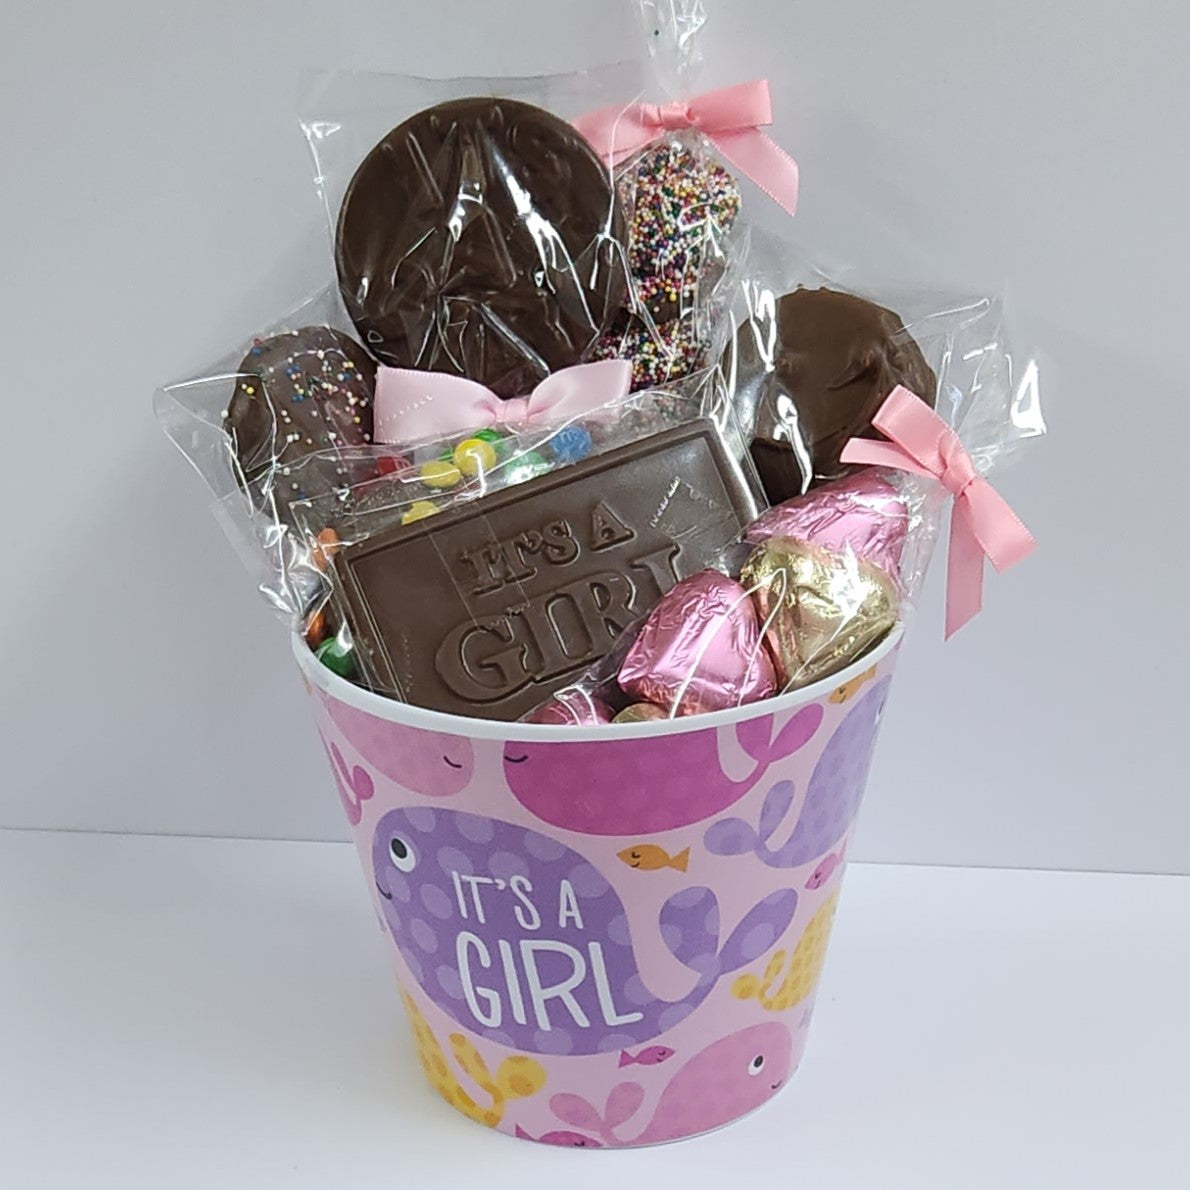 It's a Girl Gift Basket includes Milk Chocolate Nonpareils, Milk Chocolate covered Oreos, Shortbread Cookies, and a M&M-covered pretzel, pink foiled milk chocolate hearts and a special milk chocolate card and lollipop that say "It's a Girl!".